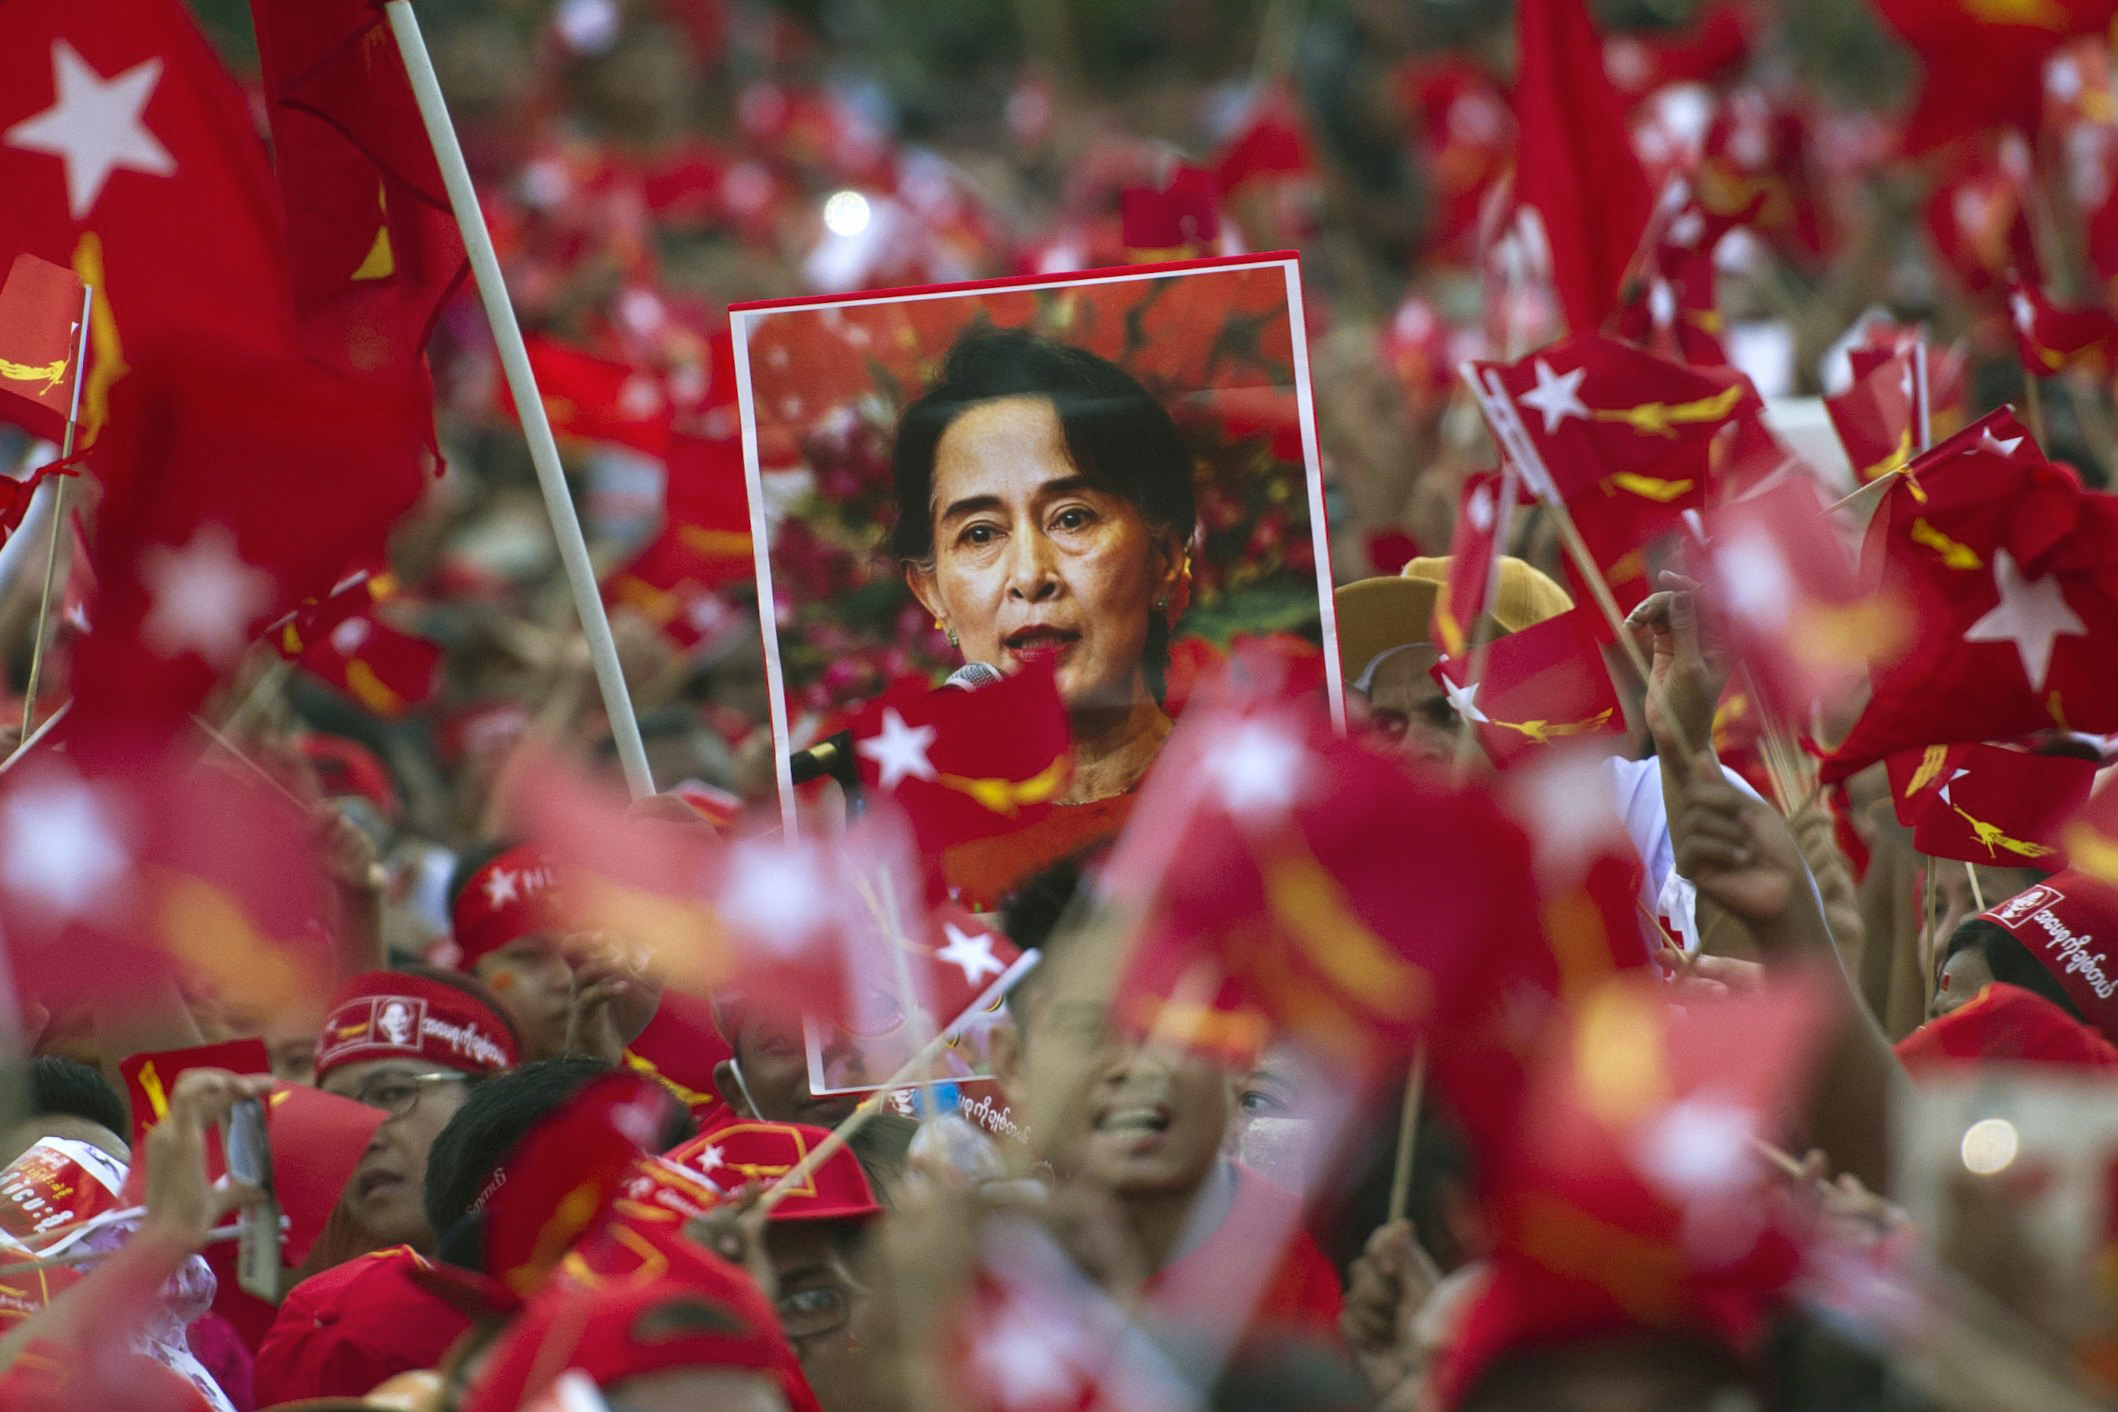 Supporters of opposition leader Aung San Suu Kyi hold posters bearing her image as they listen during a campaign speech in Yangon on Nov. 1, 2015.